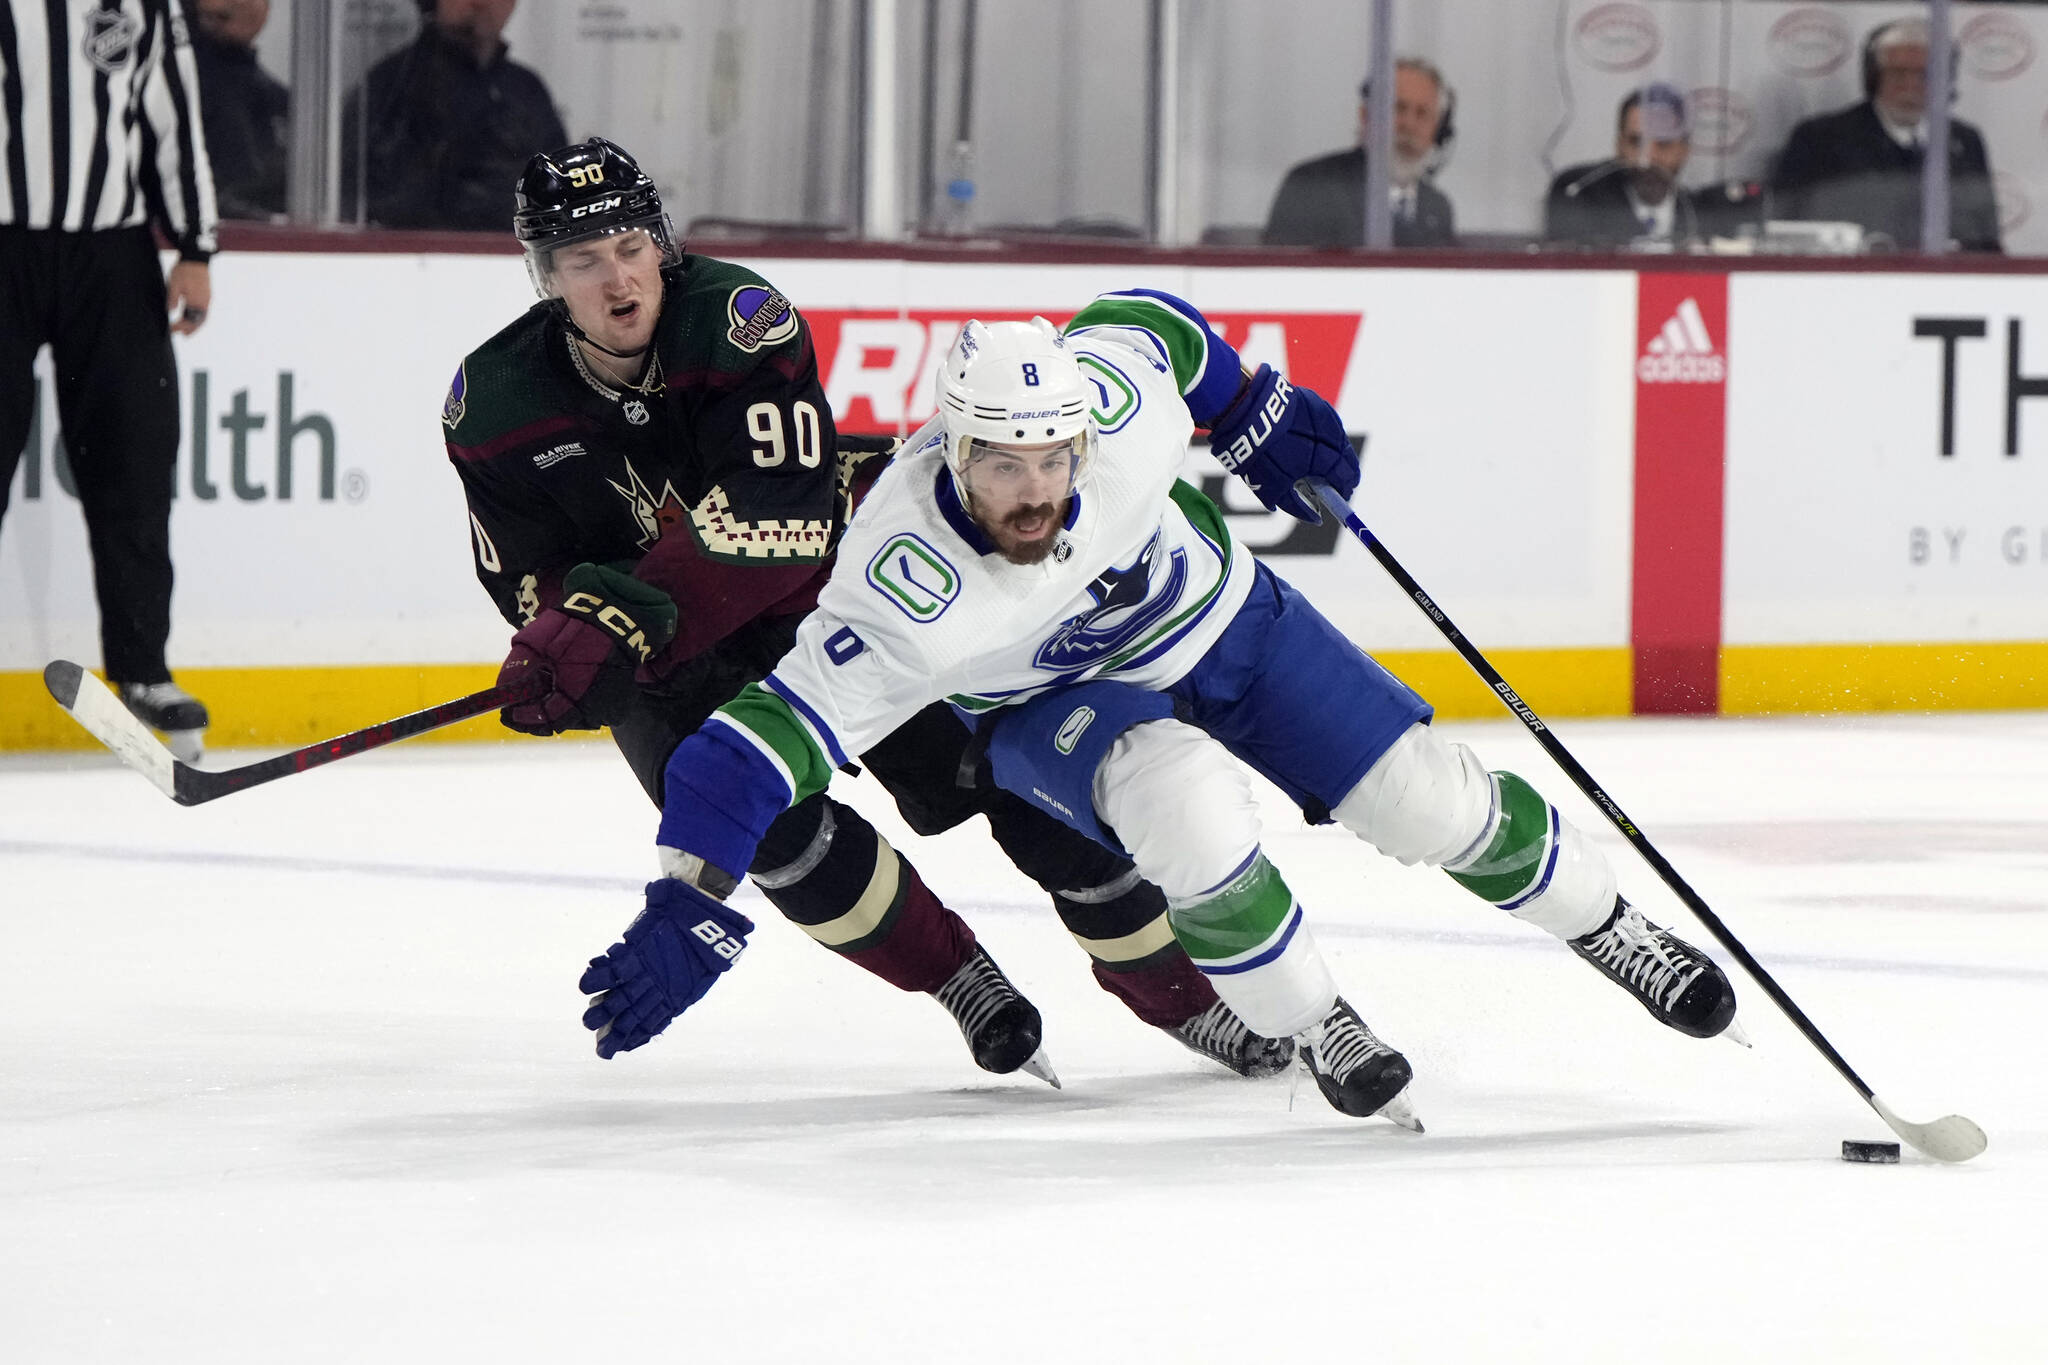 Demko looking to impress at Young Stars - Keremeos Review